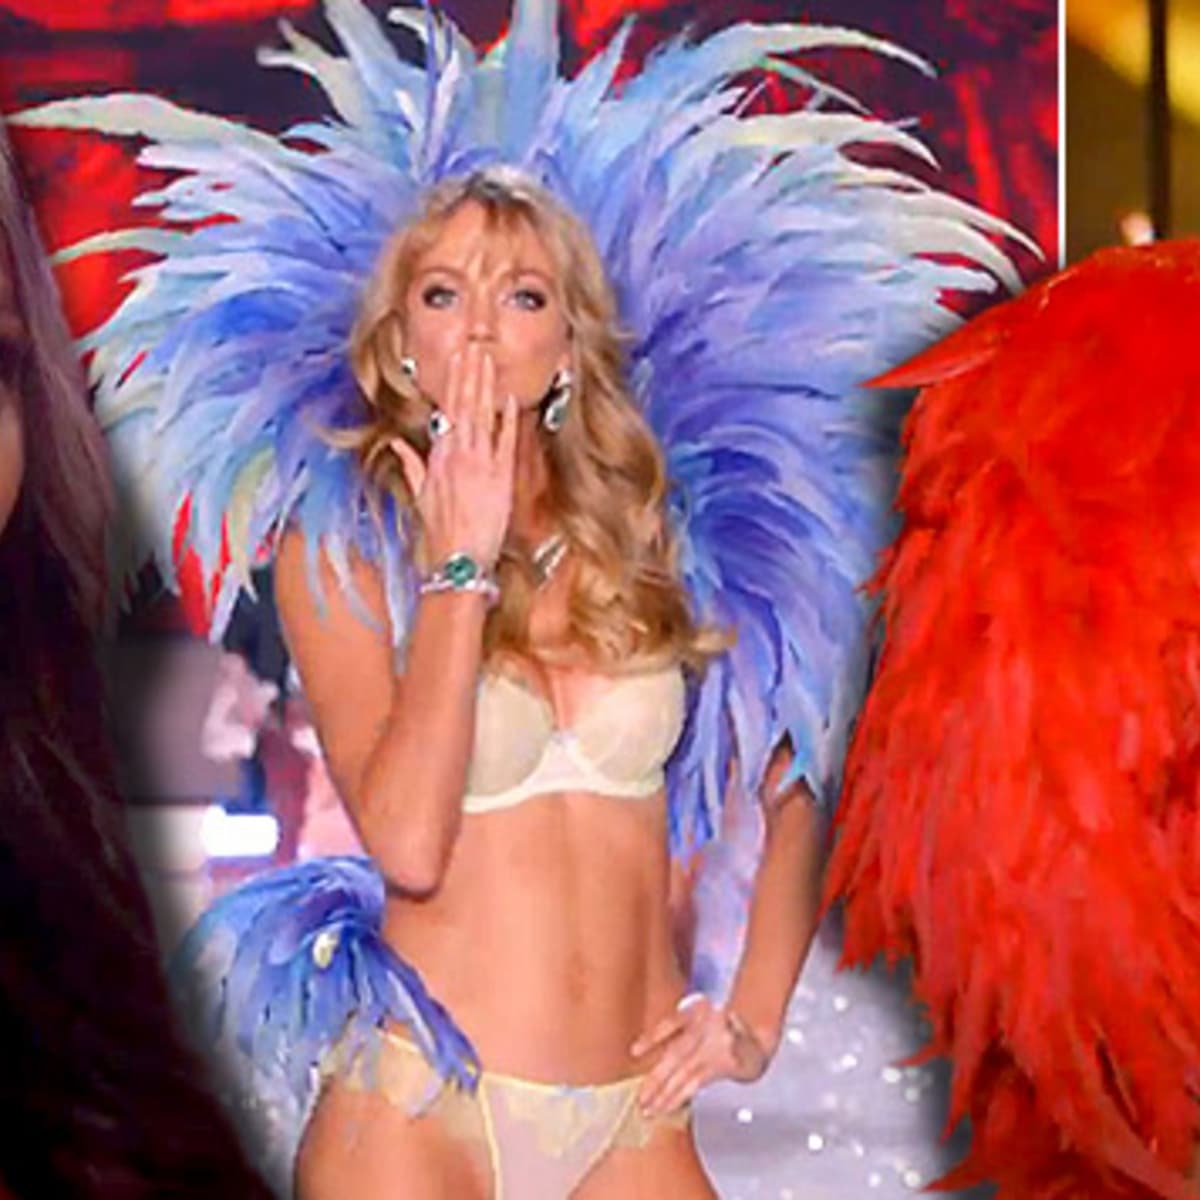 Video Highlights from the 2013 Victoria's Secret Fashion Show 